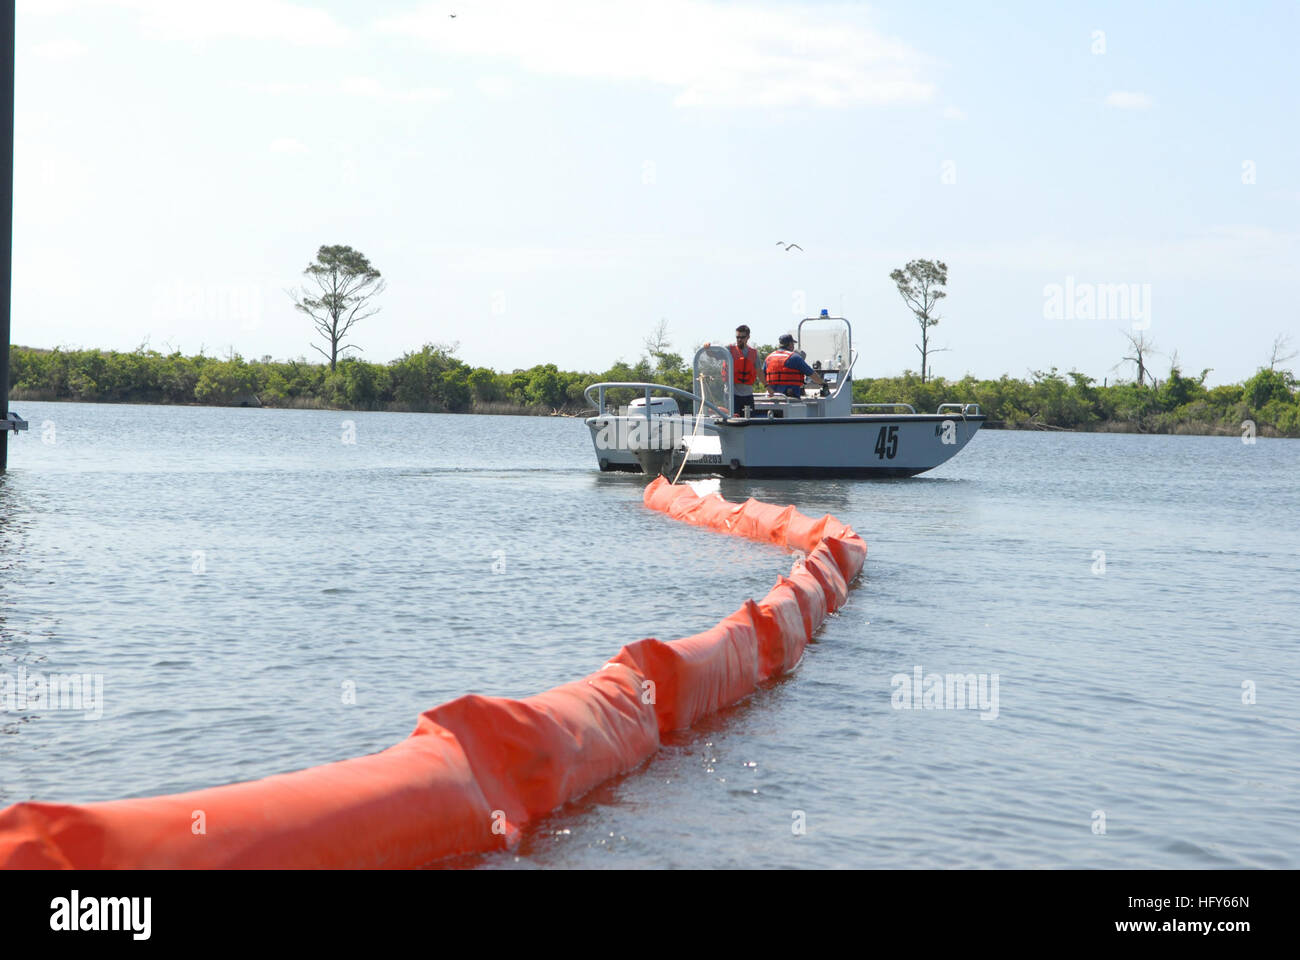 100504-N-6268N-027 PENSACOLA, Fla. (May 4, 2010) Members of the Naval Air Station Pensacola Pollution Response unit deploy an oil containment boom at Sherman Cove on the base to protect environmentally sensitive grass beds from the Deepwater Horizon oil spill. Deepwater Horizon was an ultra-deepwater oil rig that sank April 22, causing a massive oil spill threatening the U.S. Gulf Coast. (U.S. Navy photo by Patrick Nichols/Released) US Navy 100504-N-6268N-027 Members of the Naval Air Station Pensacola Pollution Response unit deploy an oil containment boom at Sherman Cove Stock Photo